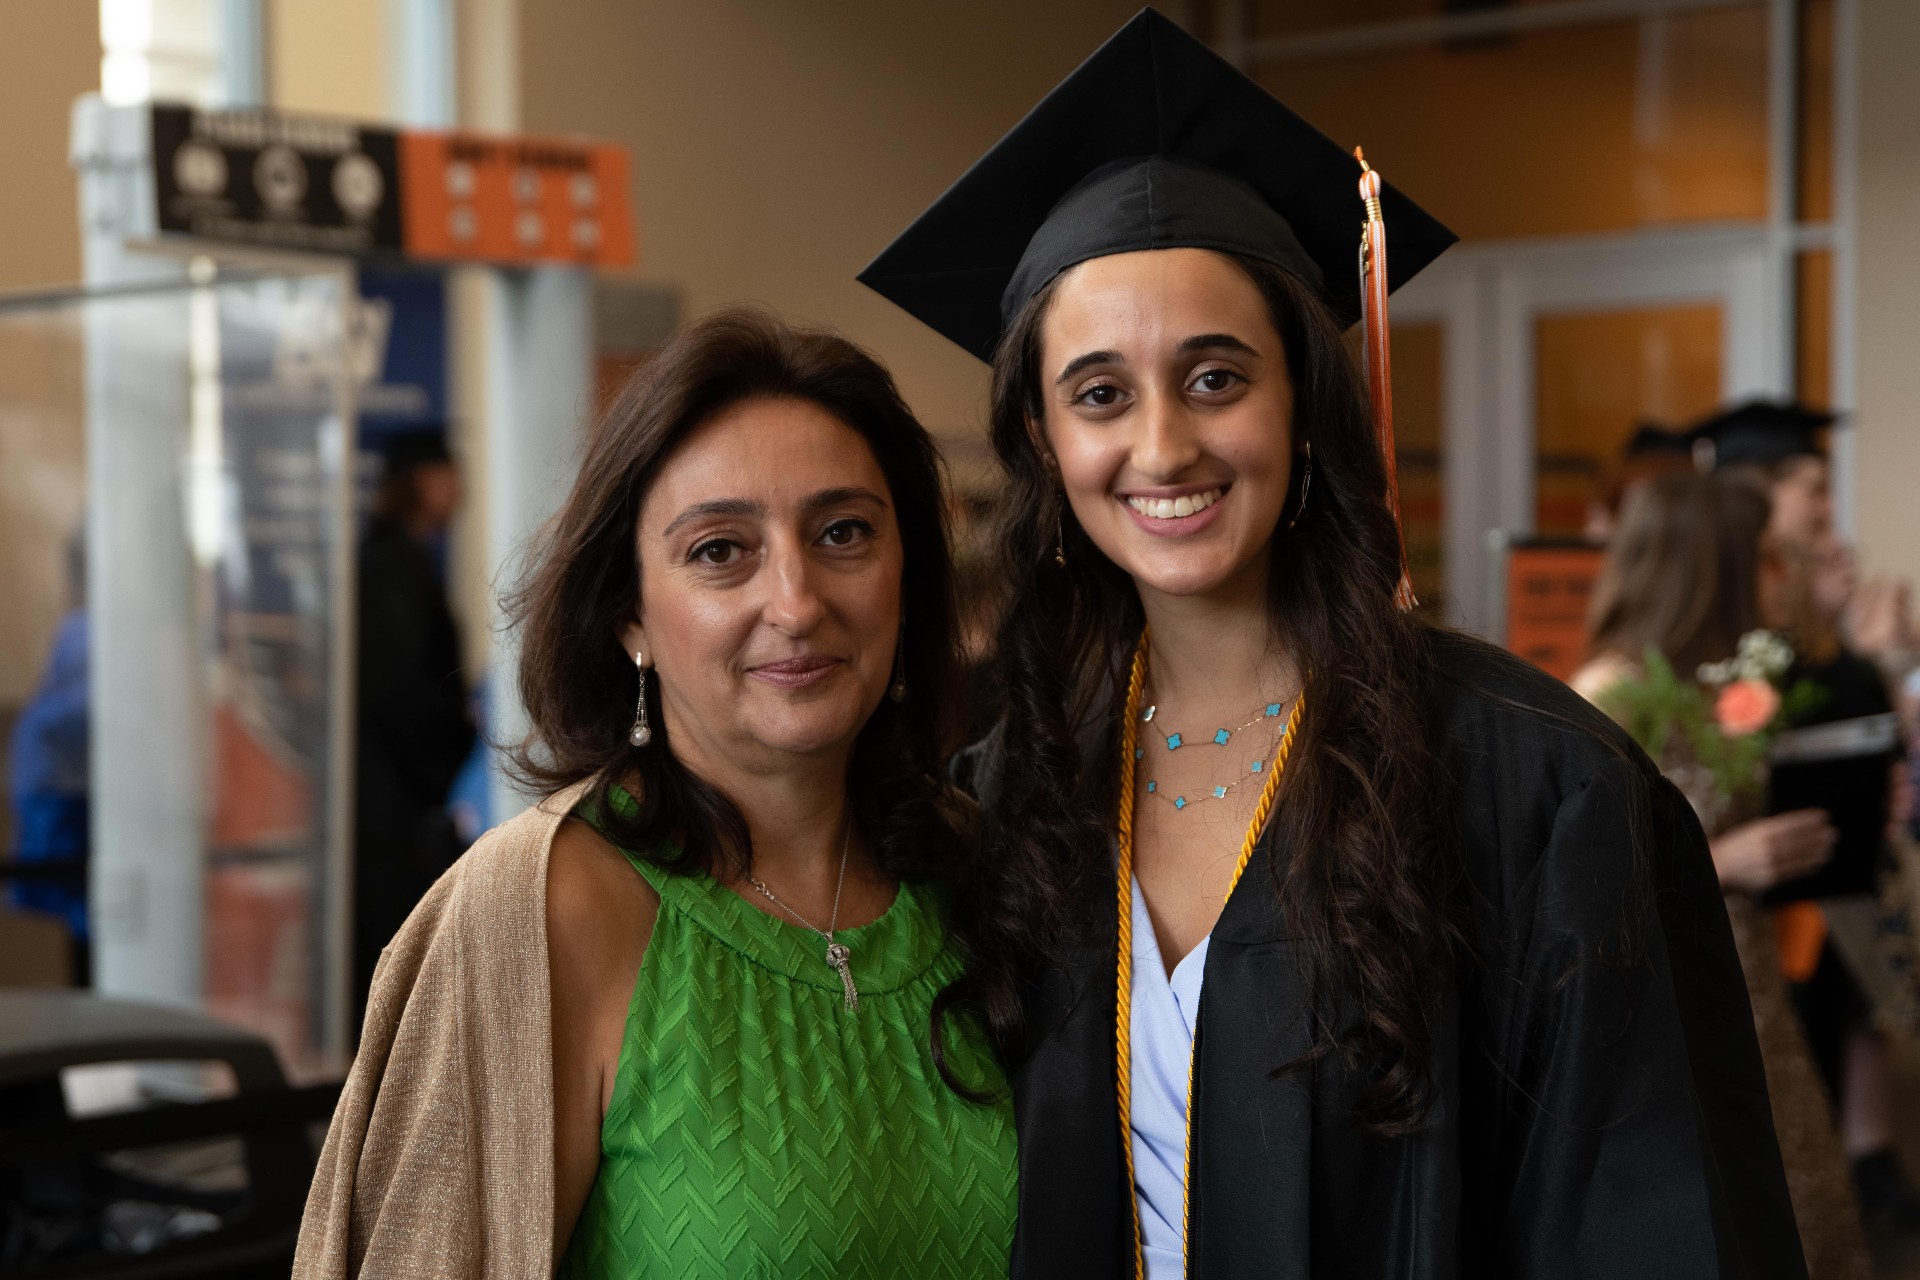 A mother in a green blouse and her graduate daughter wearing a cap pose for a photo at PA Virtual Graduation 2022.